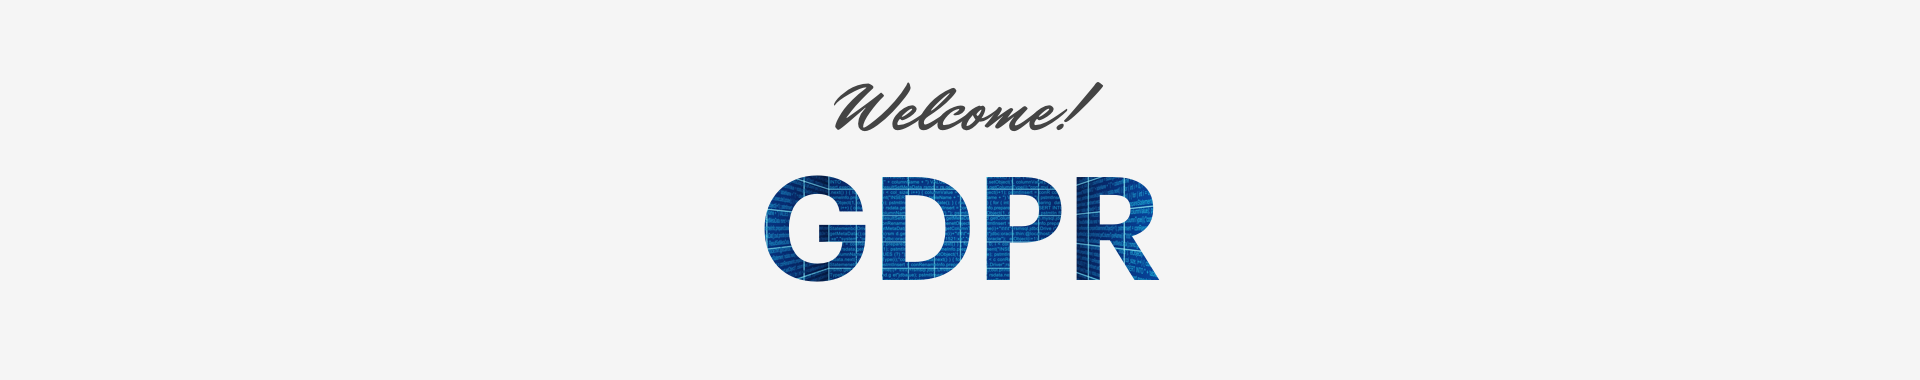 Welcome, GDPR!